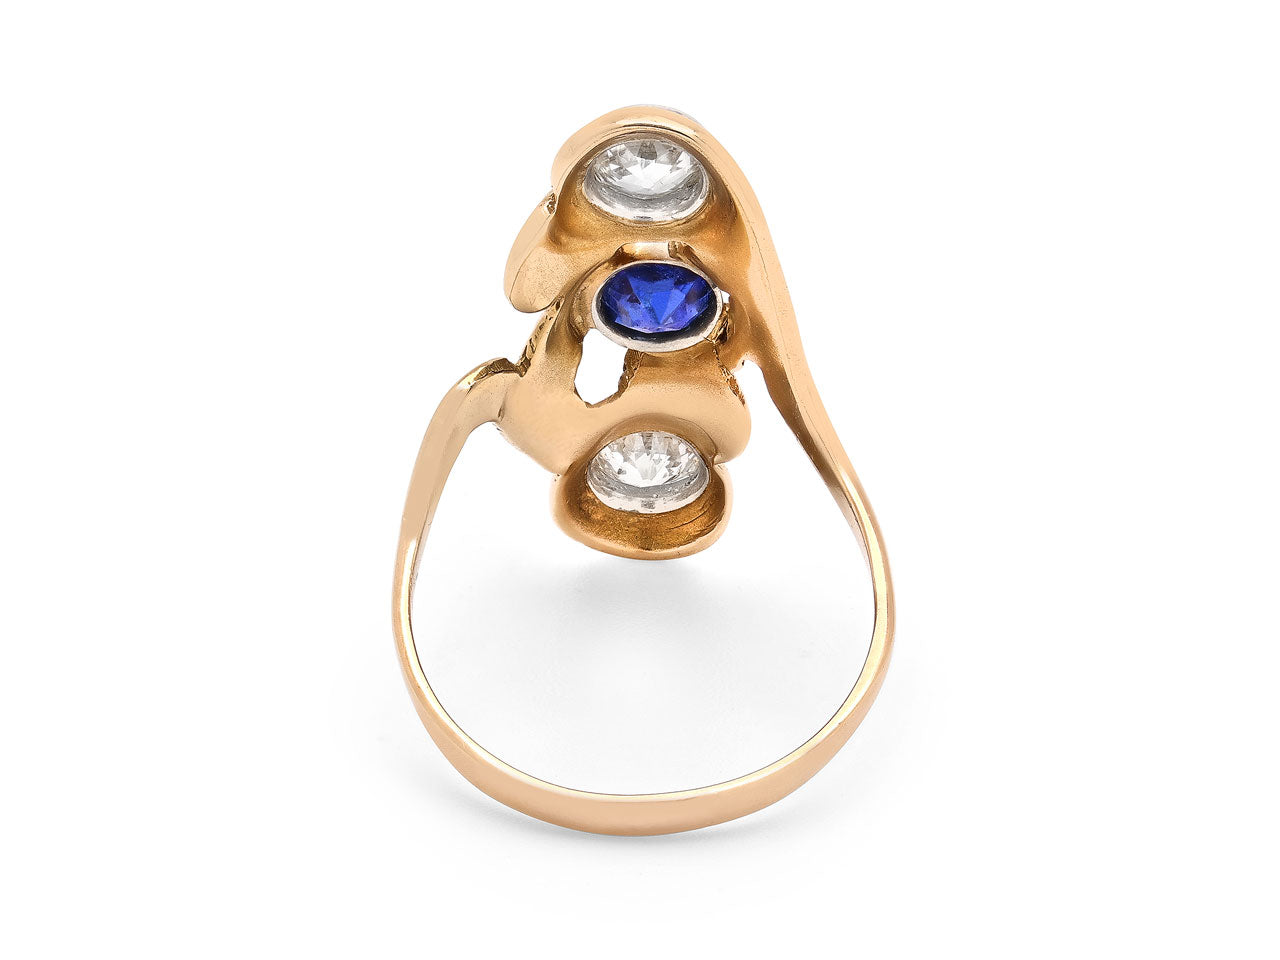 Antique Art Nouveau Sapphire and Diamond Ring in 14K Gold